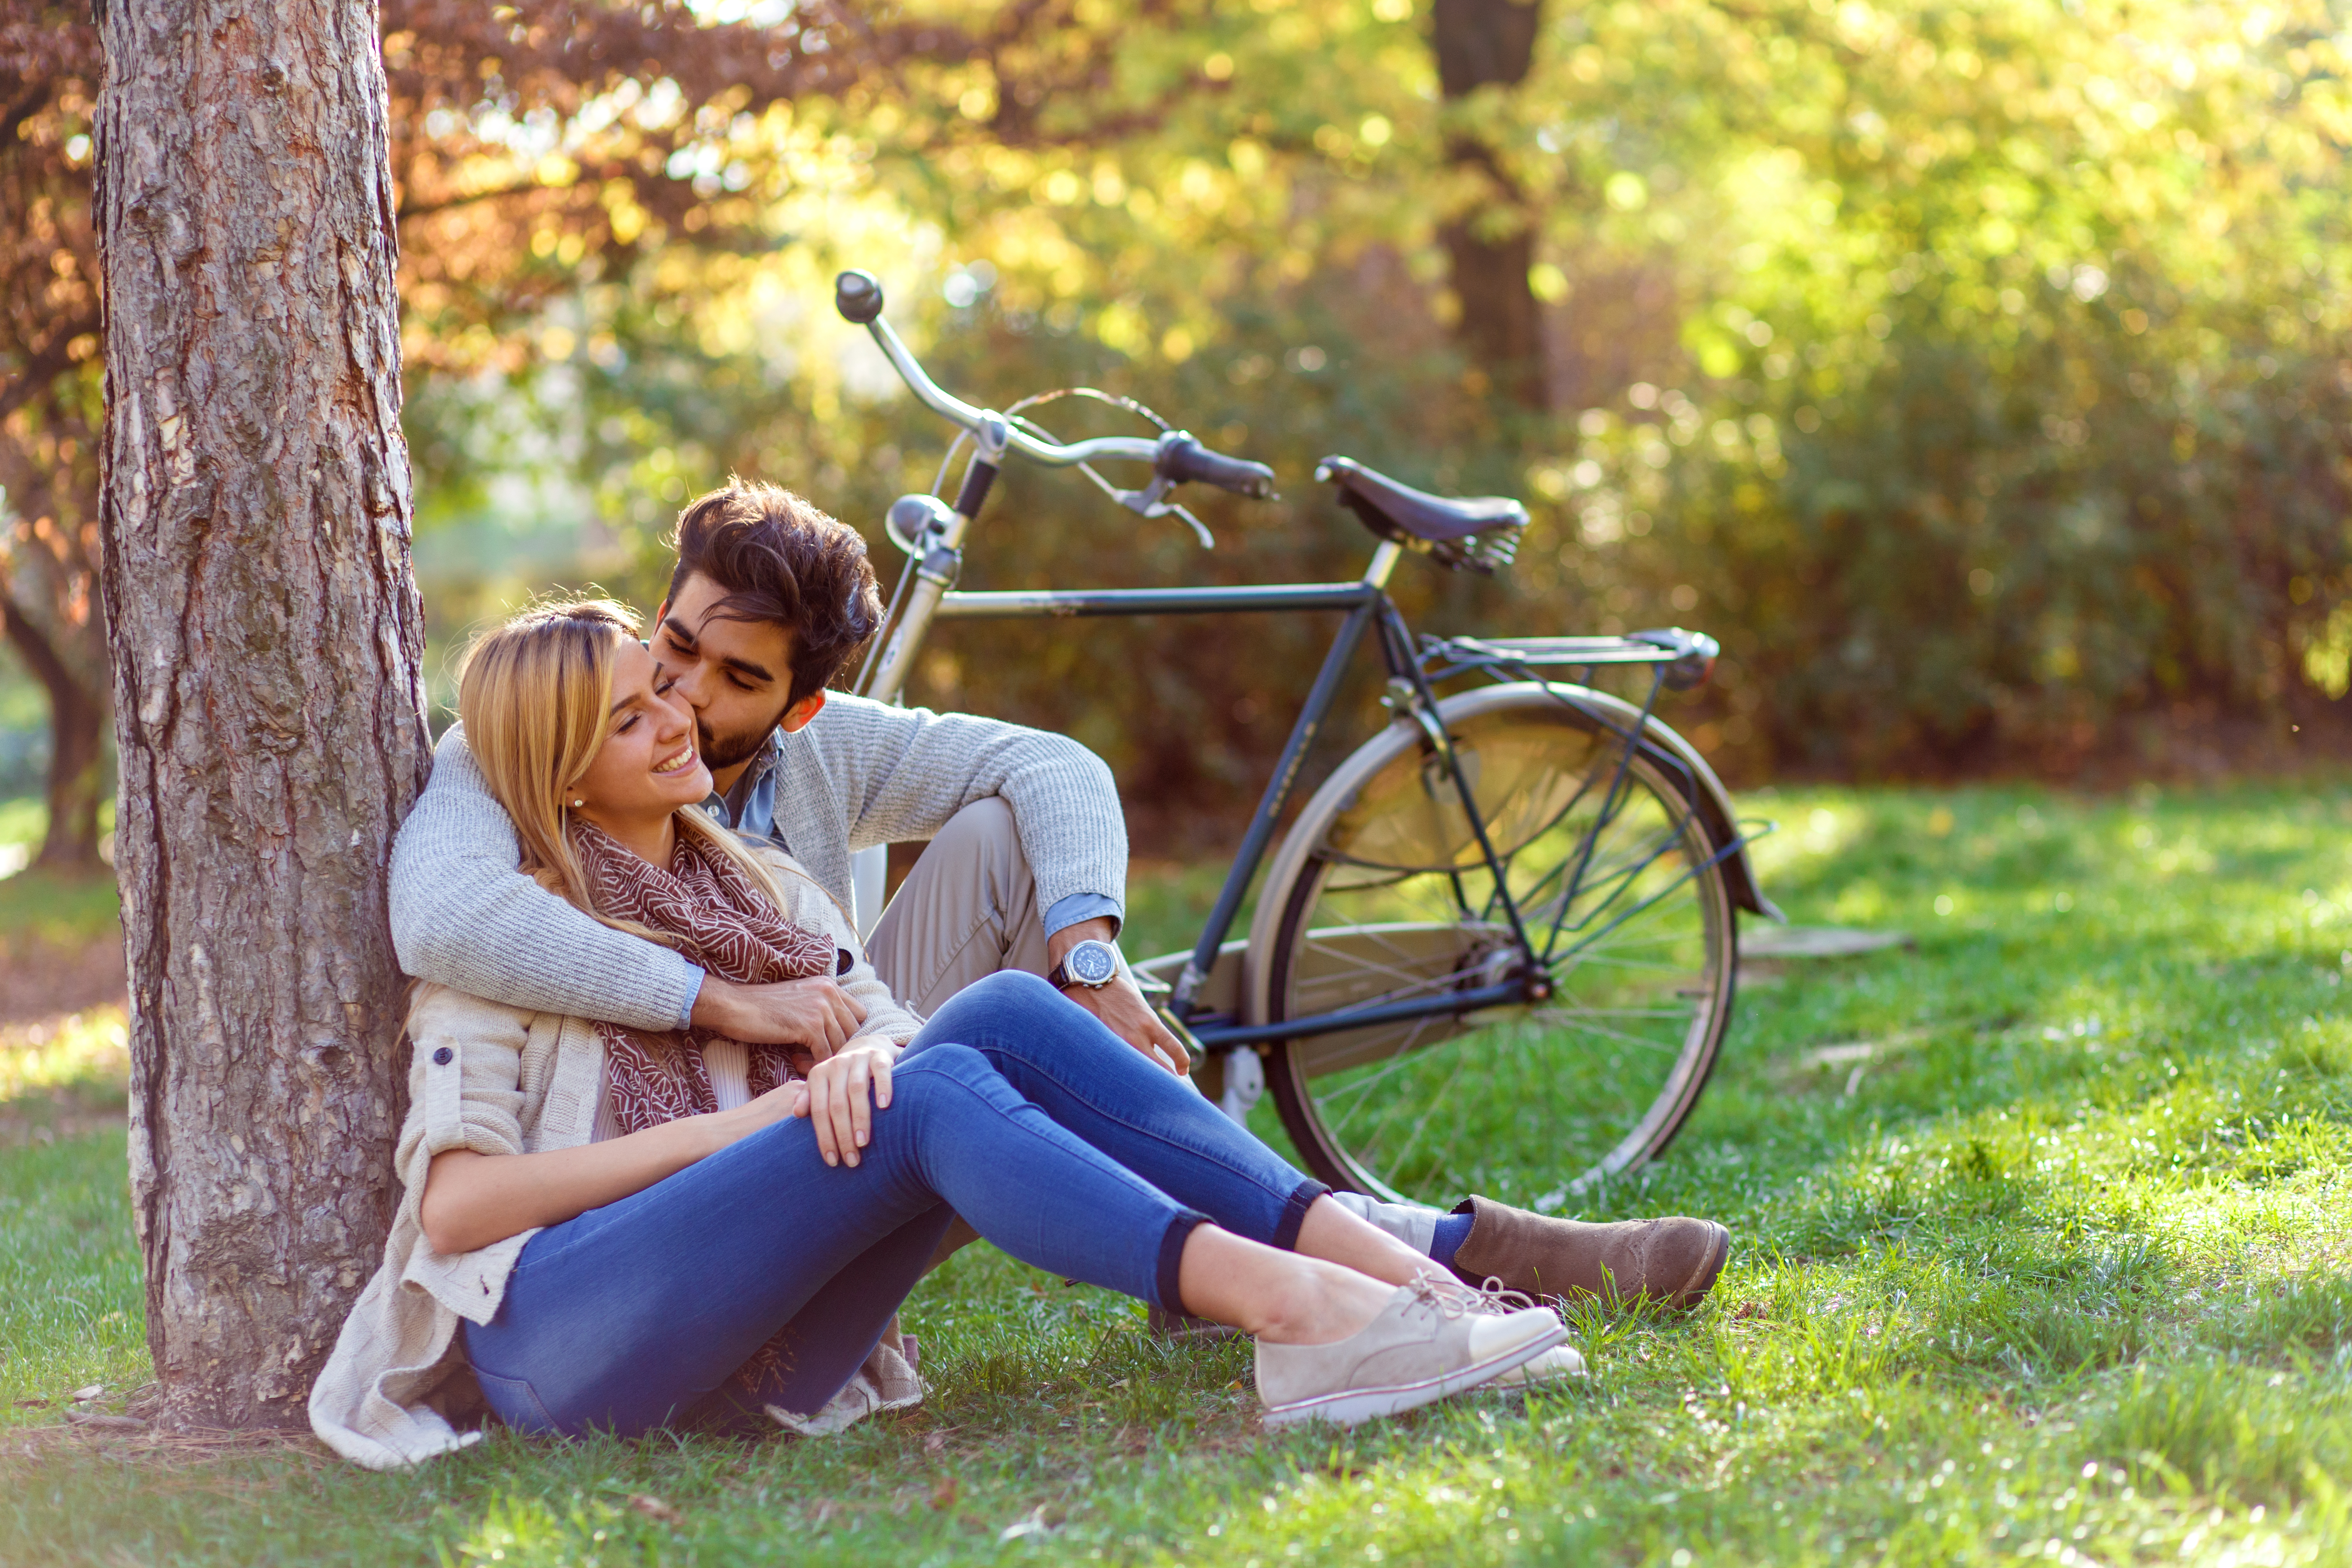 A couple having a wonderful time in the park | Source: Shutterstock